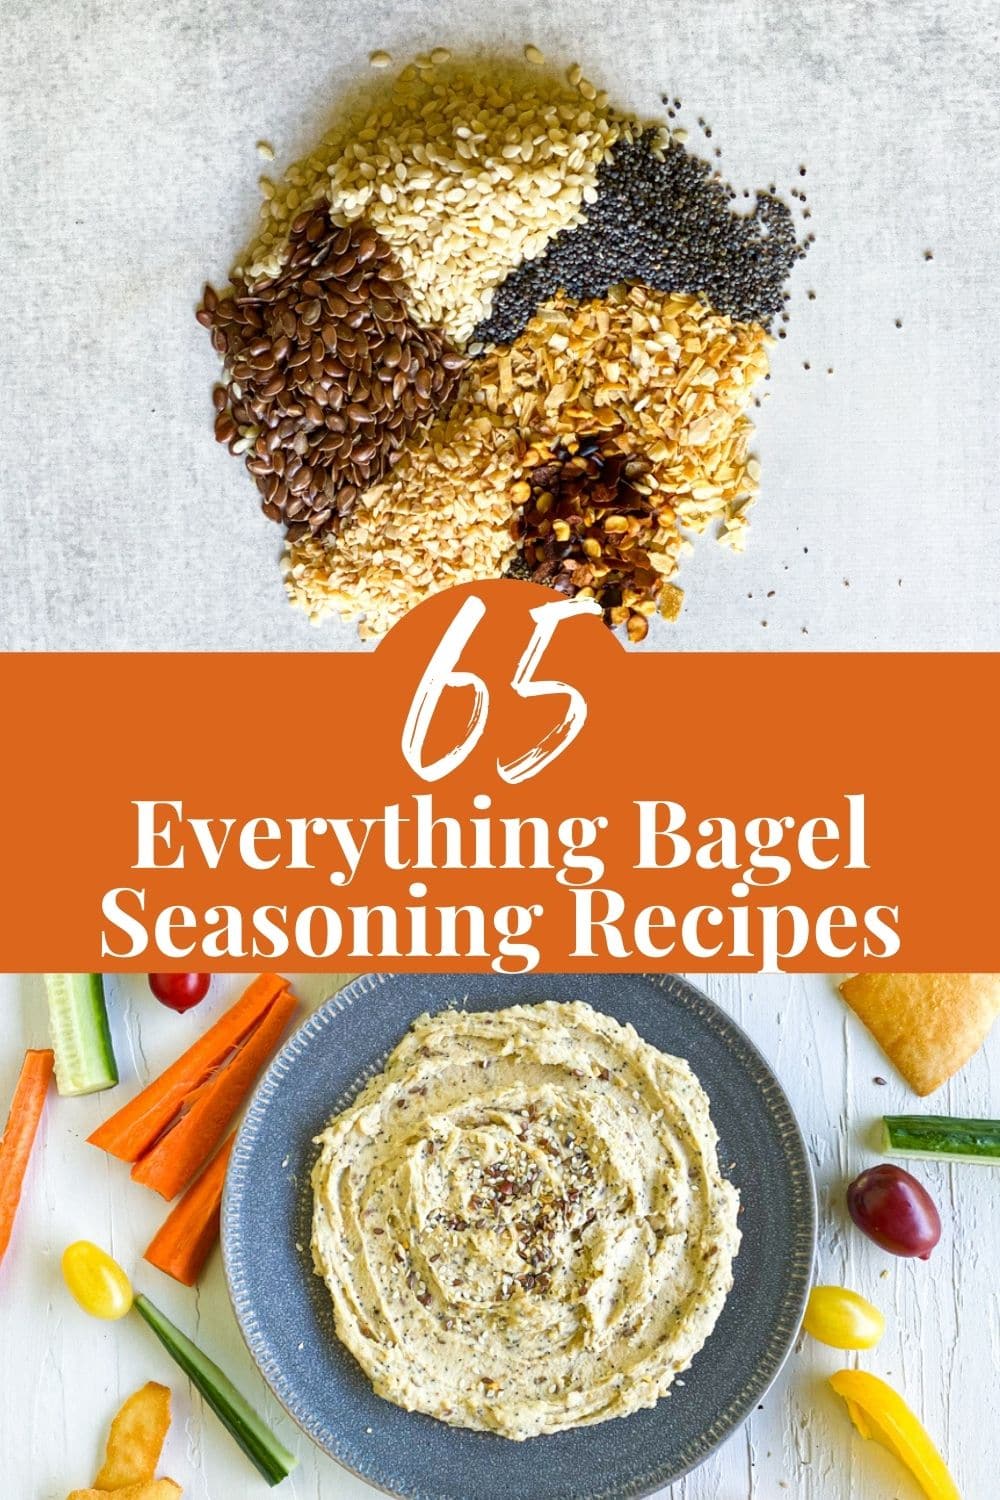 spices arranged in a circle at the top. 65 everything bagel seasoning recipes in the middle in white writing with an orange background. Everything hummus at the bottom on a gray plate with sliced veggies around in. 